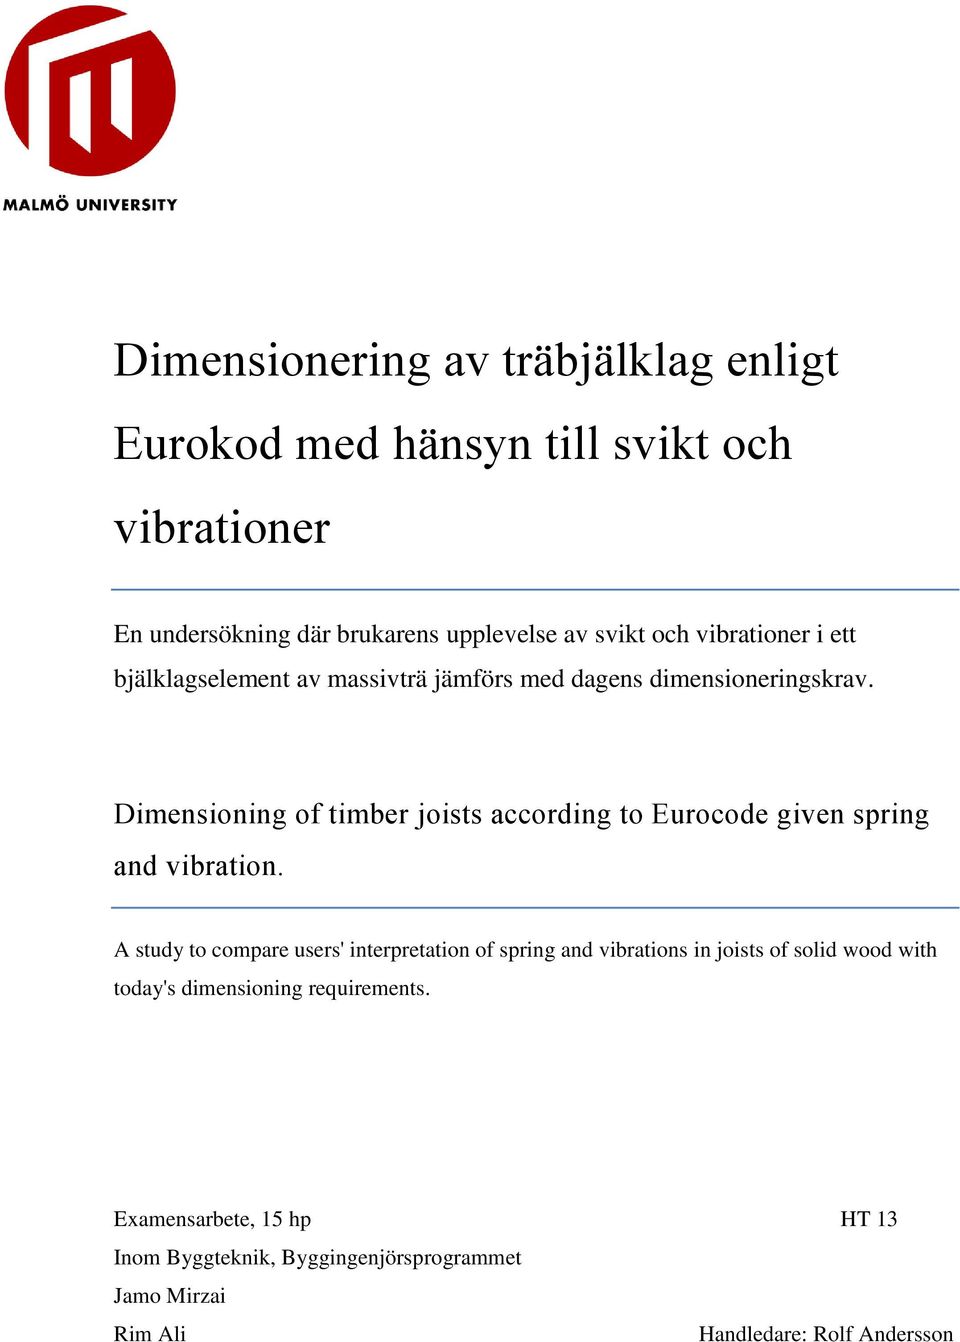 Dimensioning of timber joists according to Eurocode given spring and vibration.